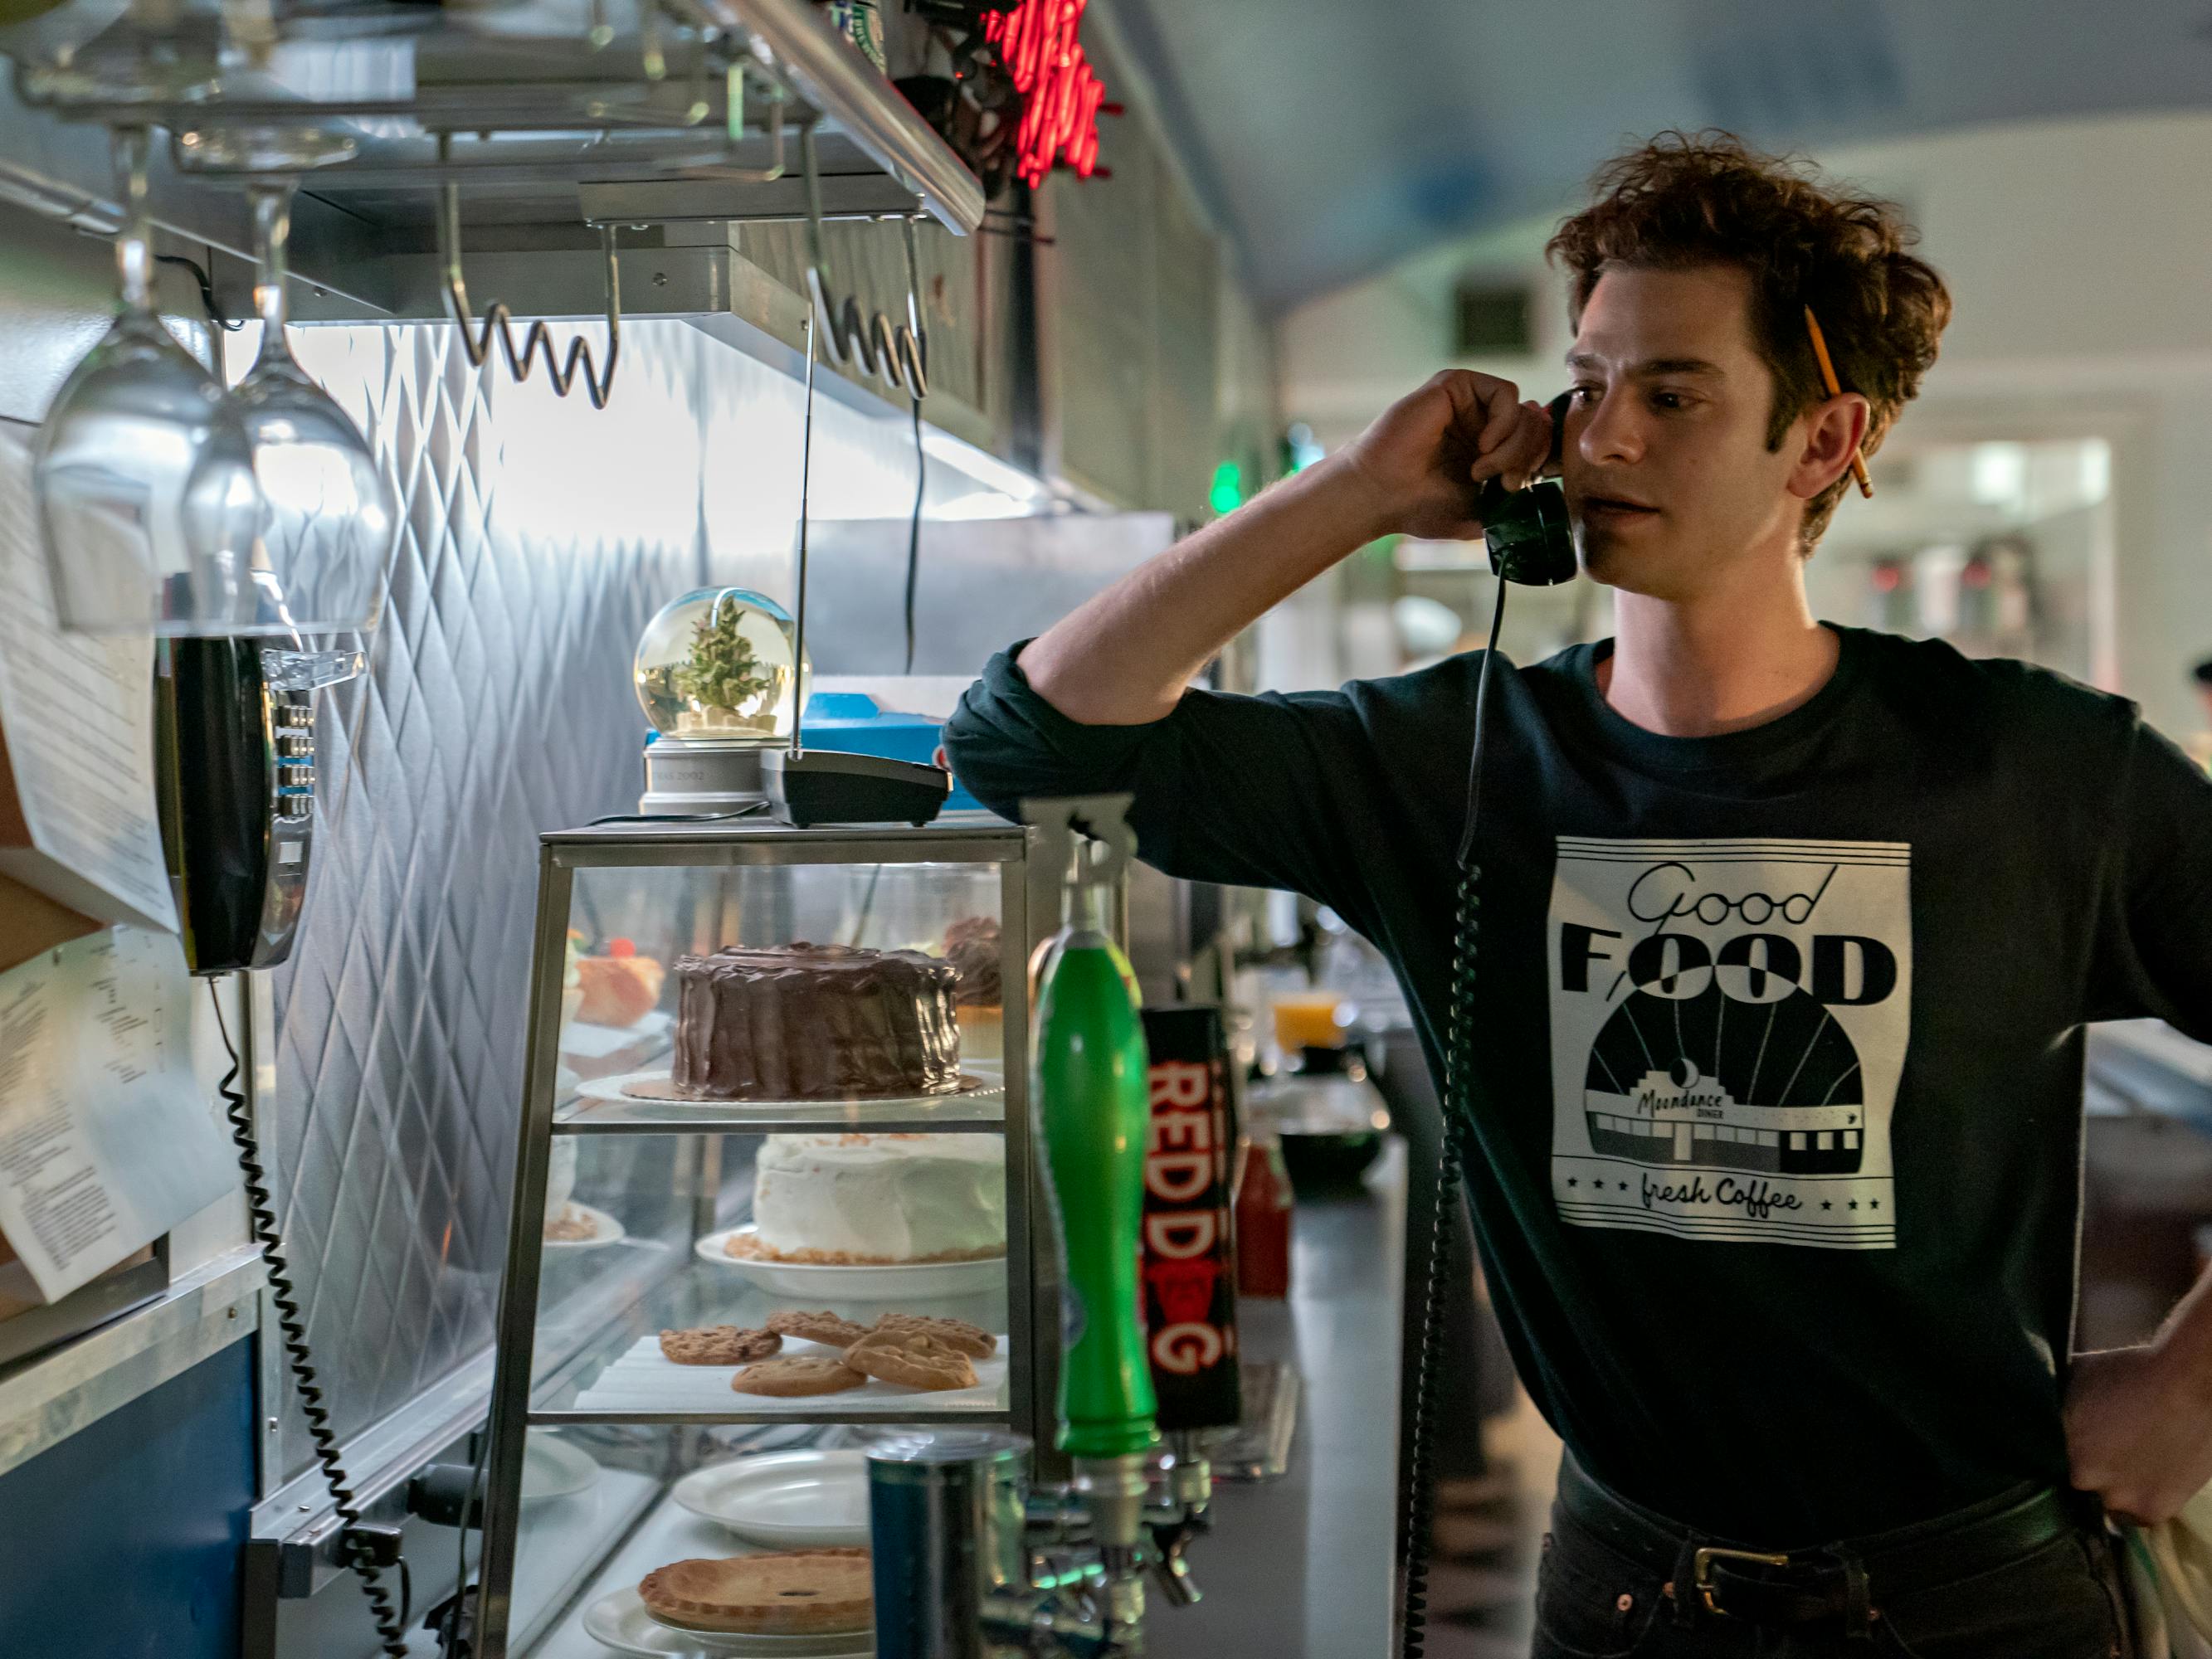 Andrew Garfield wears a Moondance Diner shirt and talks on the phone in the diner. 